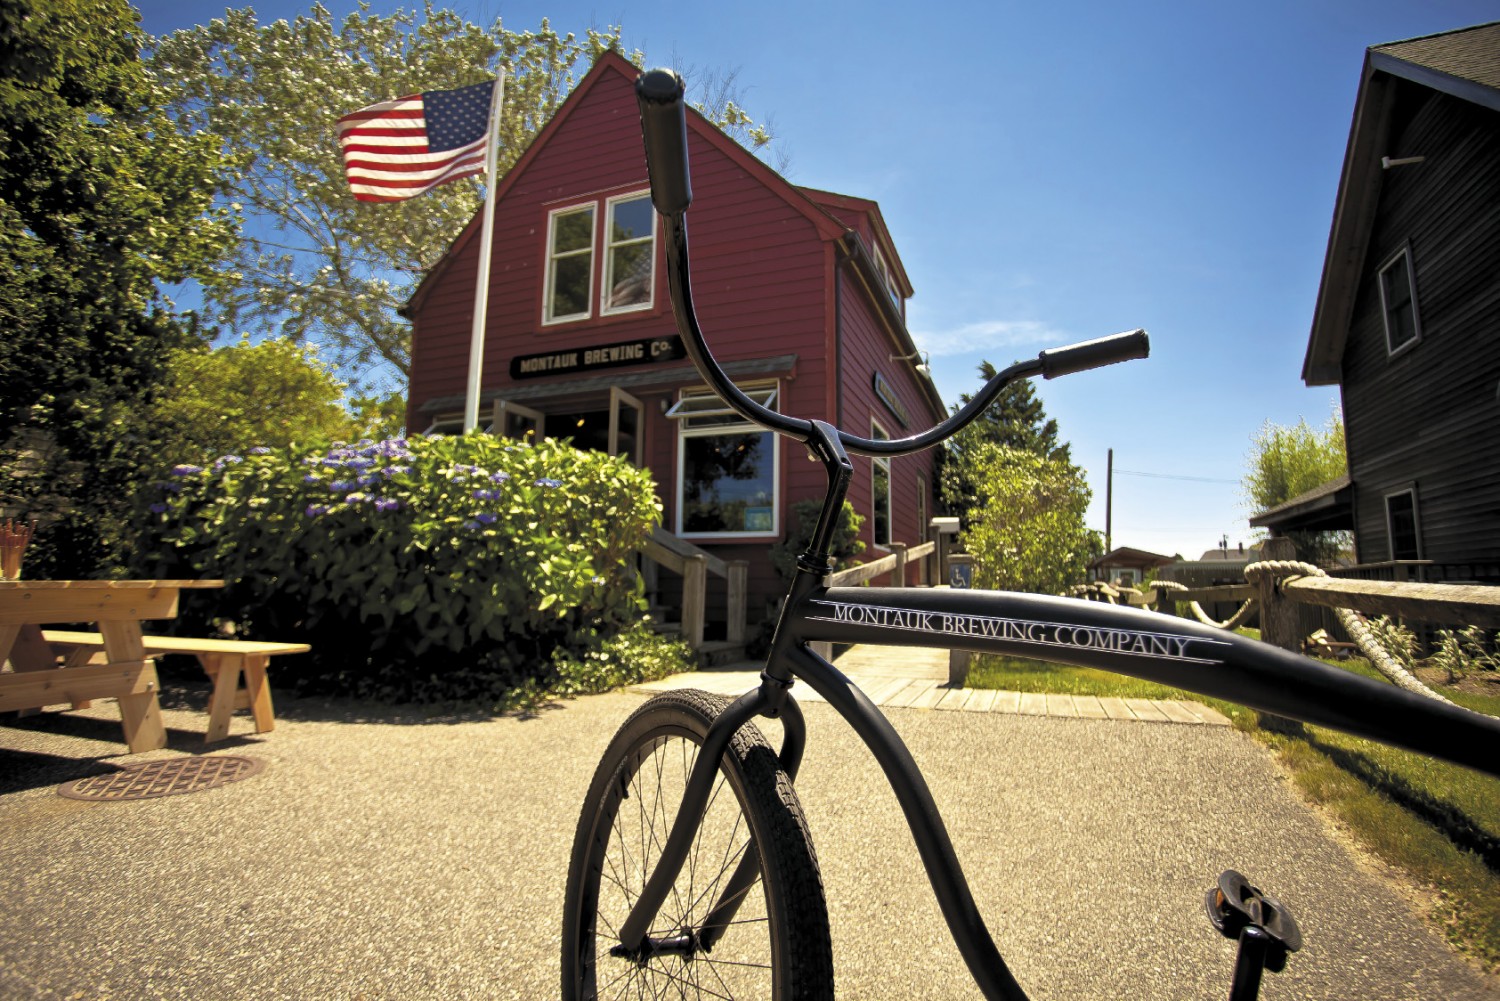 Photo of Montauk Brewing Company. There is a vintage black bike with the words "Montauk Brewing Company" in white across the frame sitting in front of the camera and the large dark red wood building of Montauk Brewing Company is in the background.